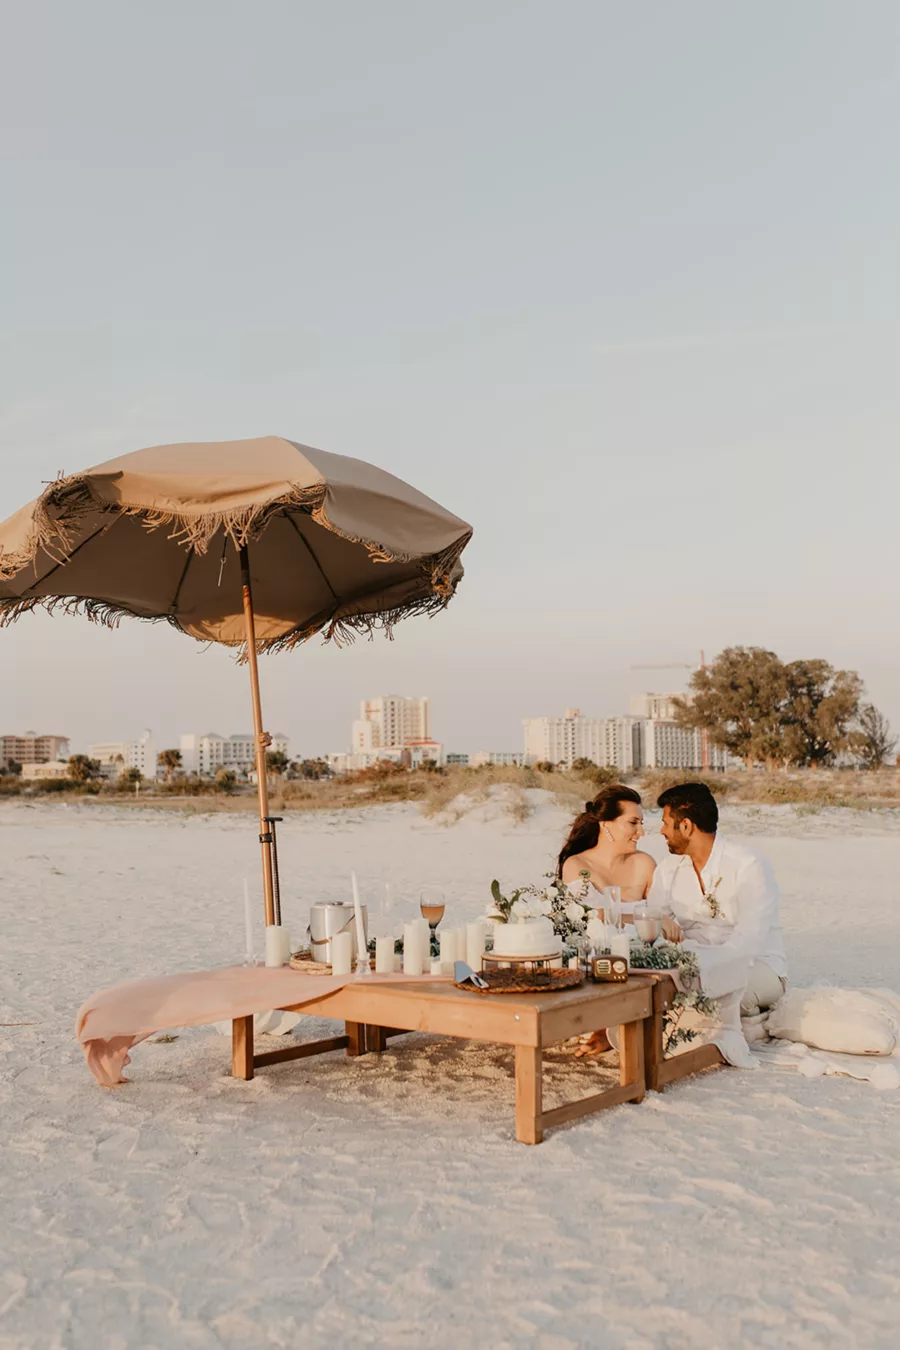 Intimate Bride and Groom Beach Wedding Elopement Decor Inspiration | Low Picnic Table, Boho Tassel Umbrella, and Flameless Candles